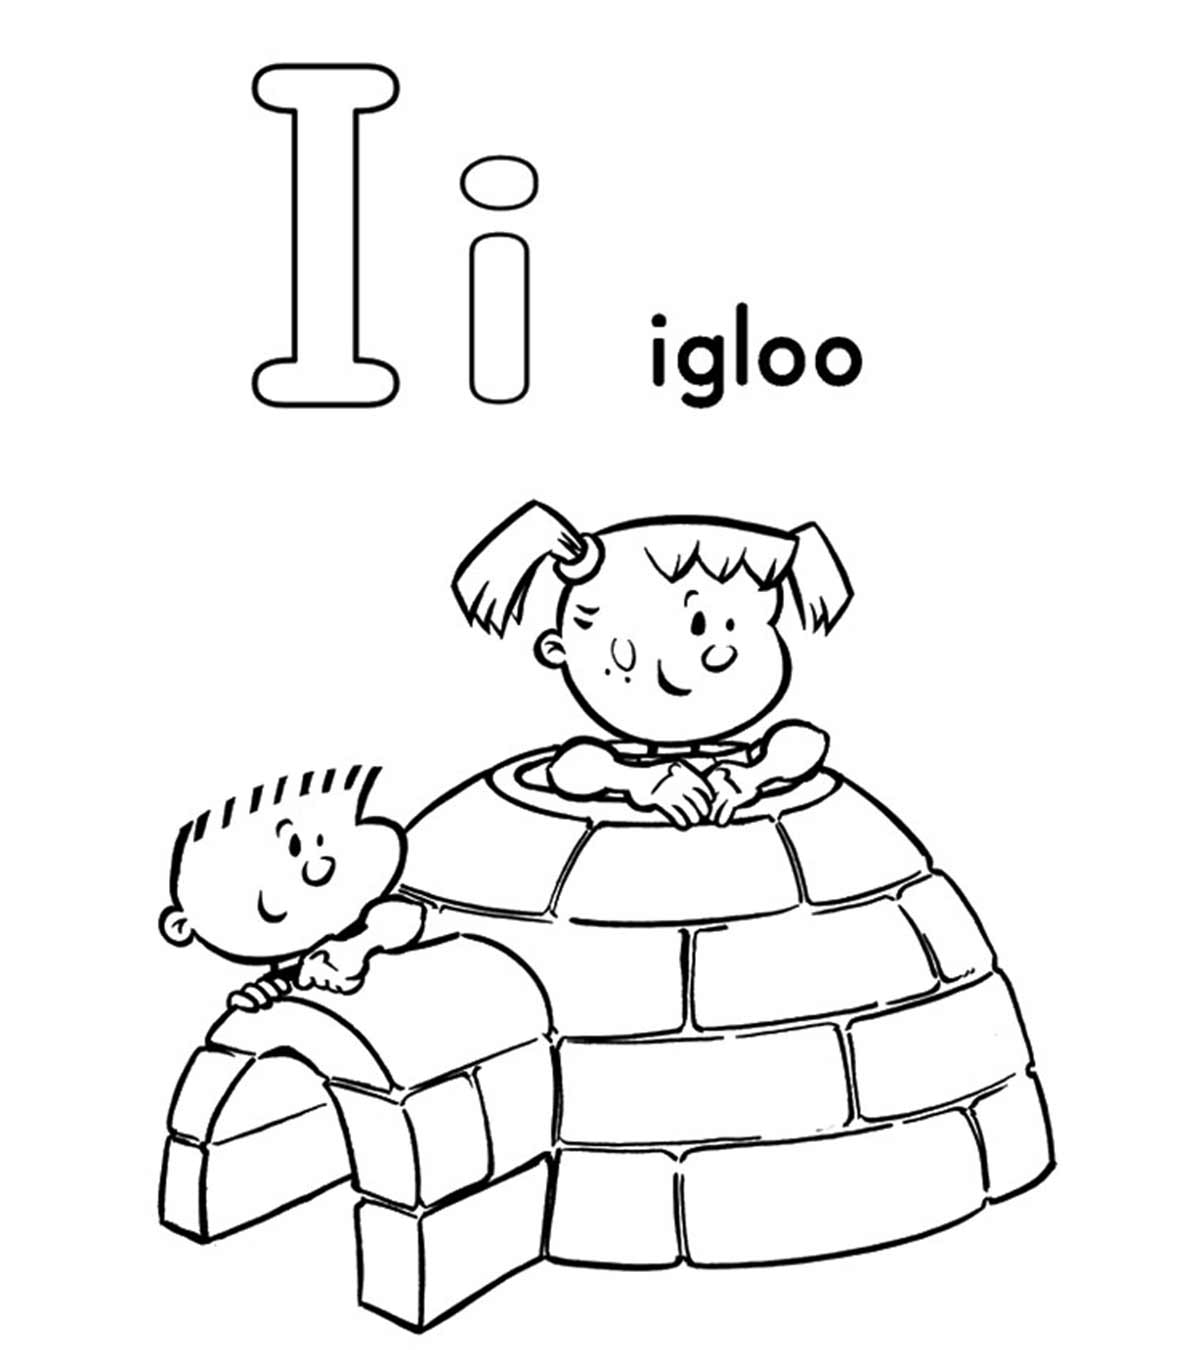 Top 10 Letter ‘I’ Coloring Pages Your Toddler Will Love To Learn & Color